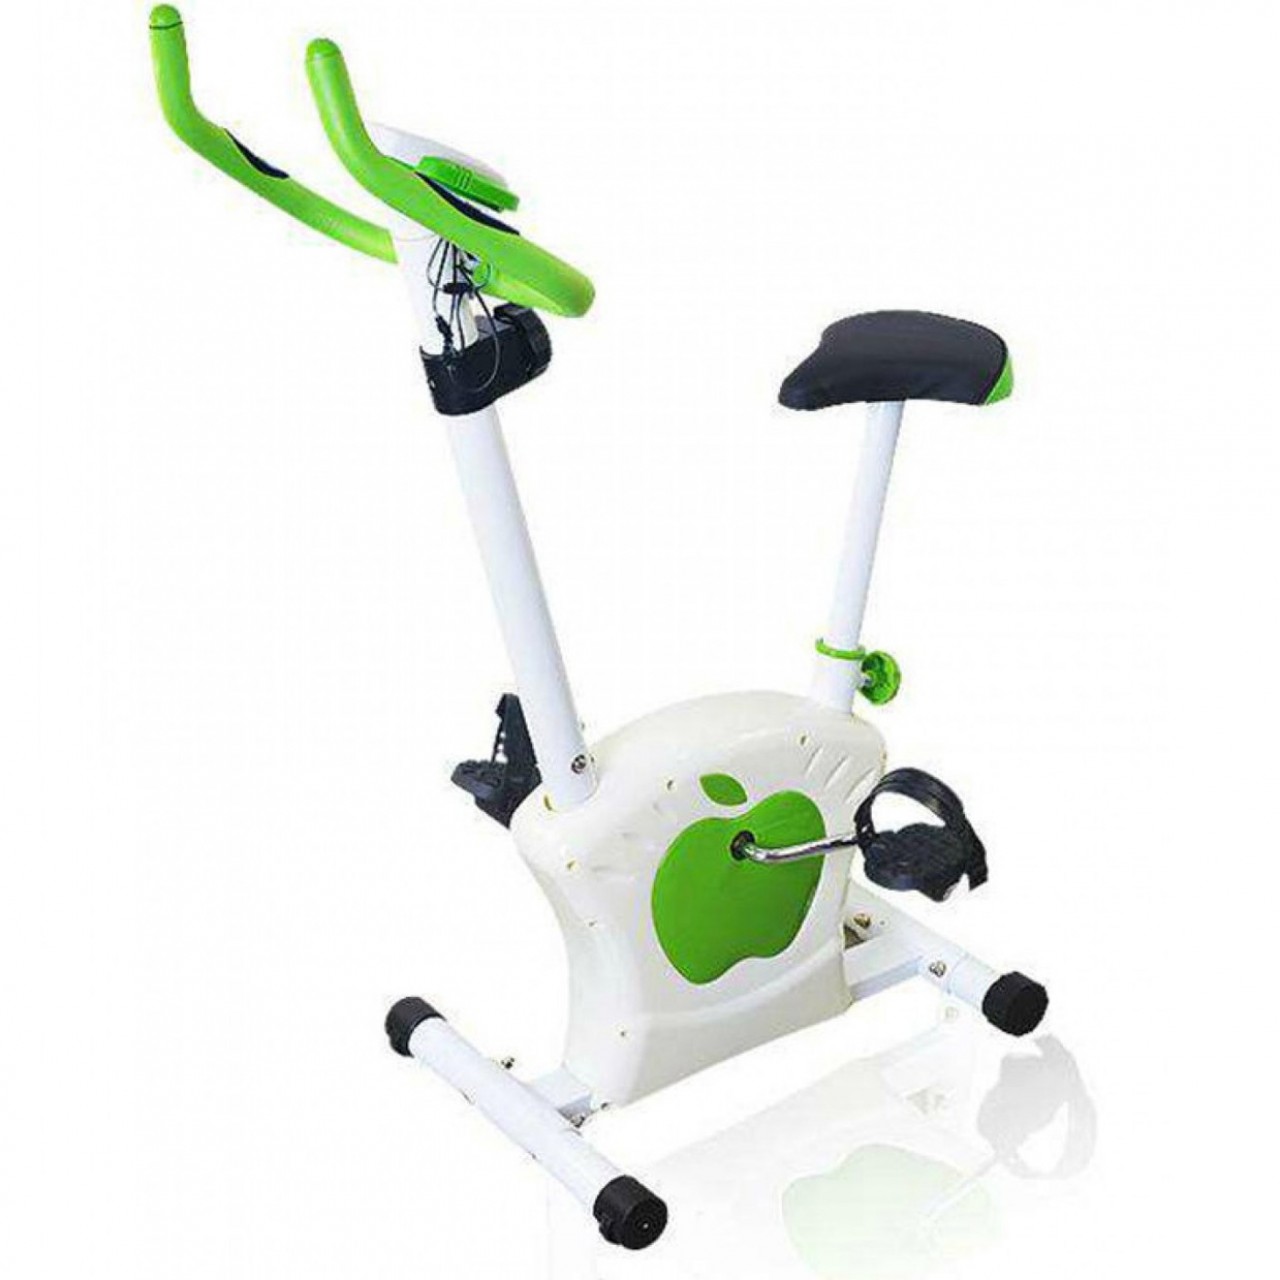 Apple Themed Bicycle For Weight Loss - Holds Weight UpTo 130kg - Digital Meter